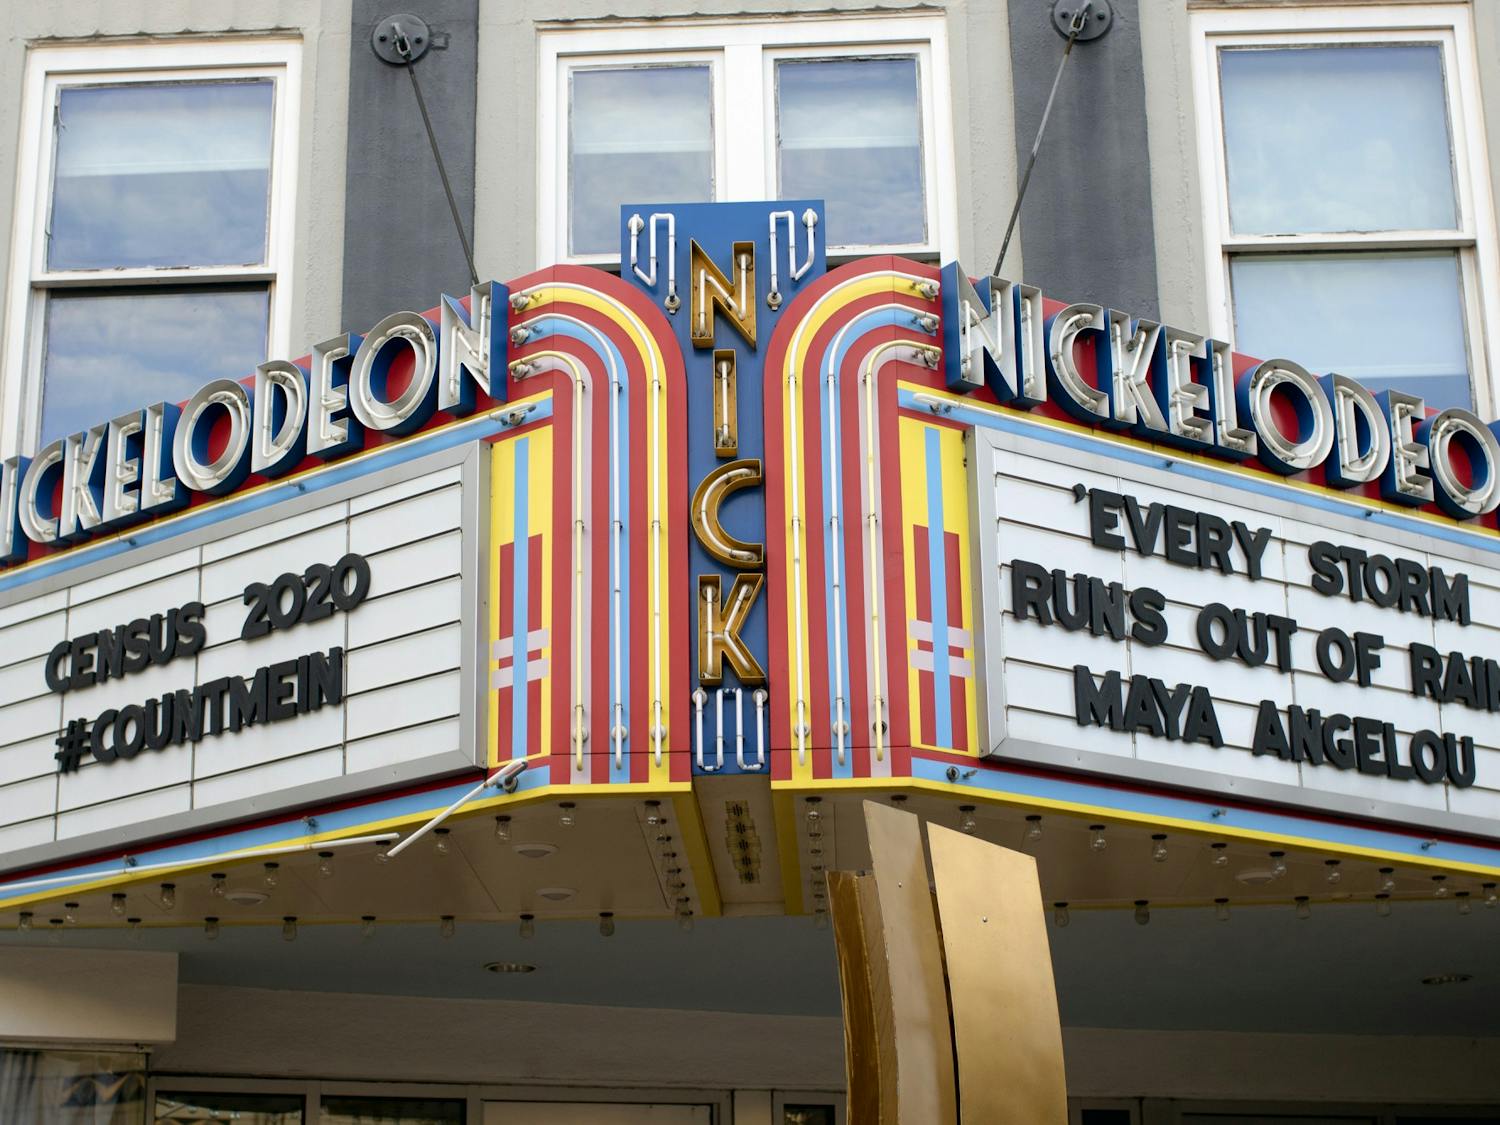 The marquee on the exterior of The Nickelodeon displays a hashtag referring to the census and a Maya Angelou quote. While the theater has canceled all in-person screenings due to COVID-19, it continues to offer virtual screening rooms.